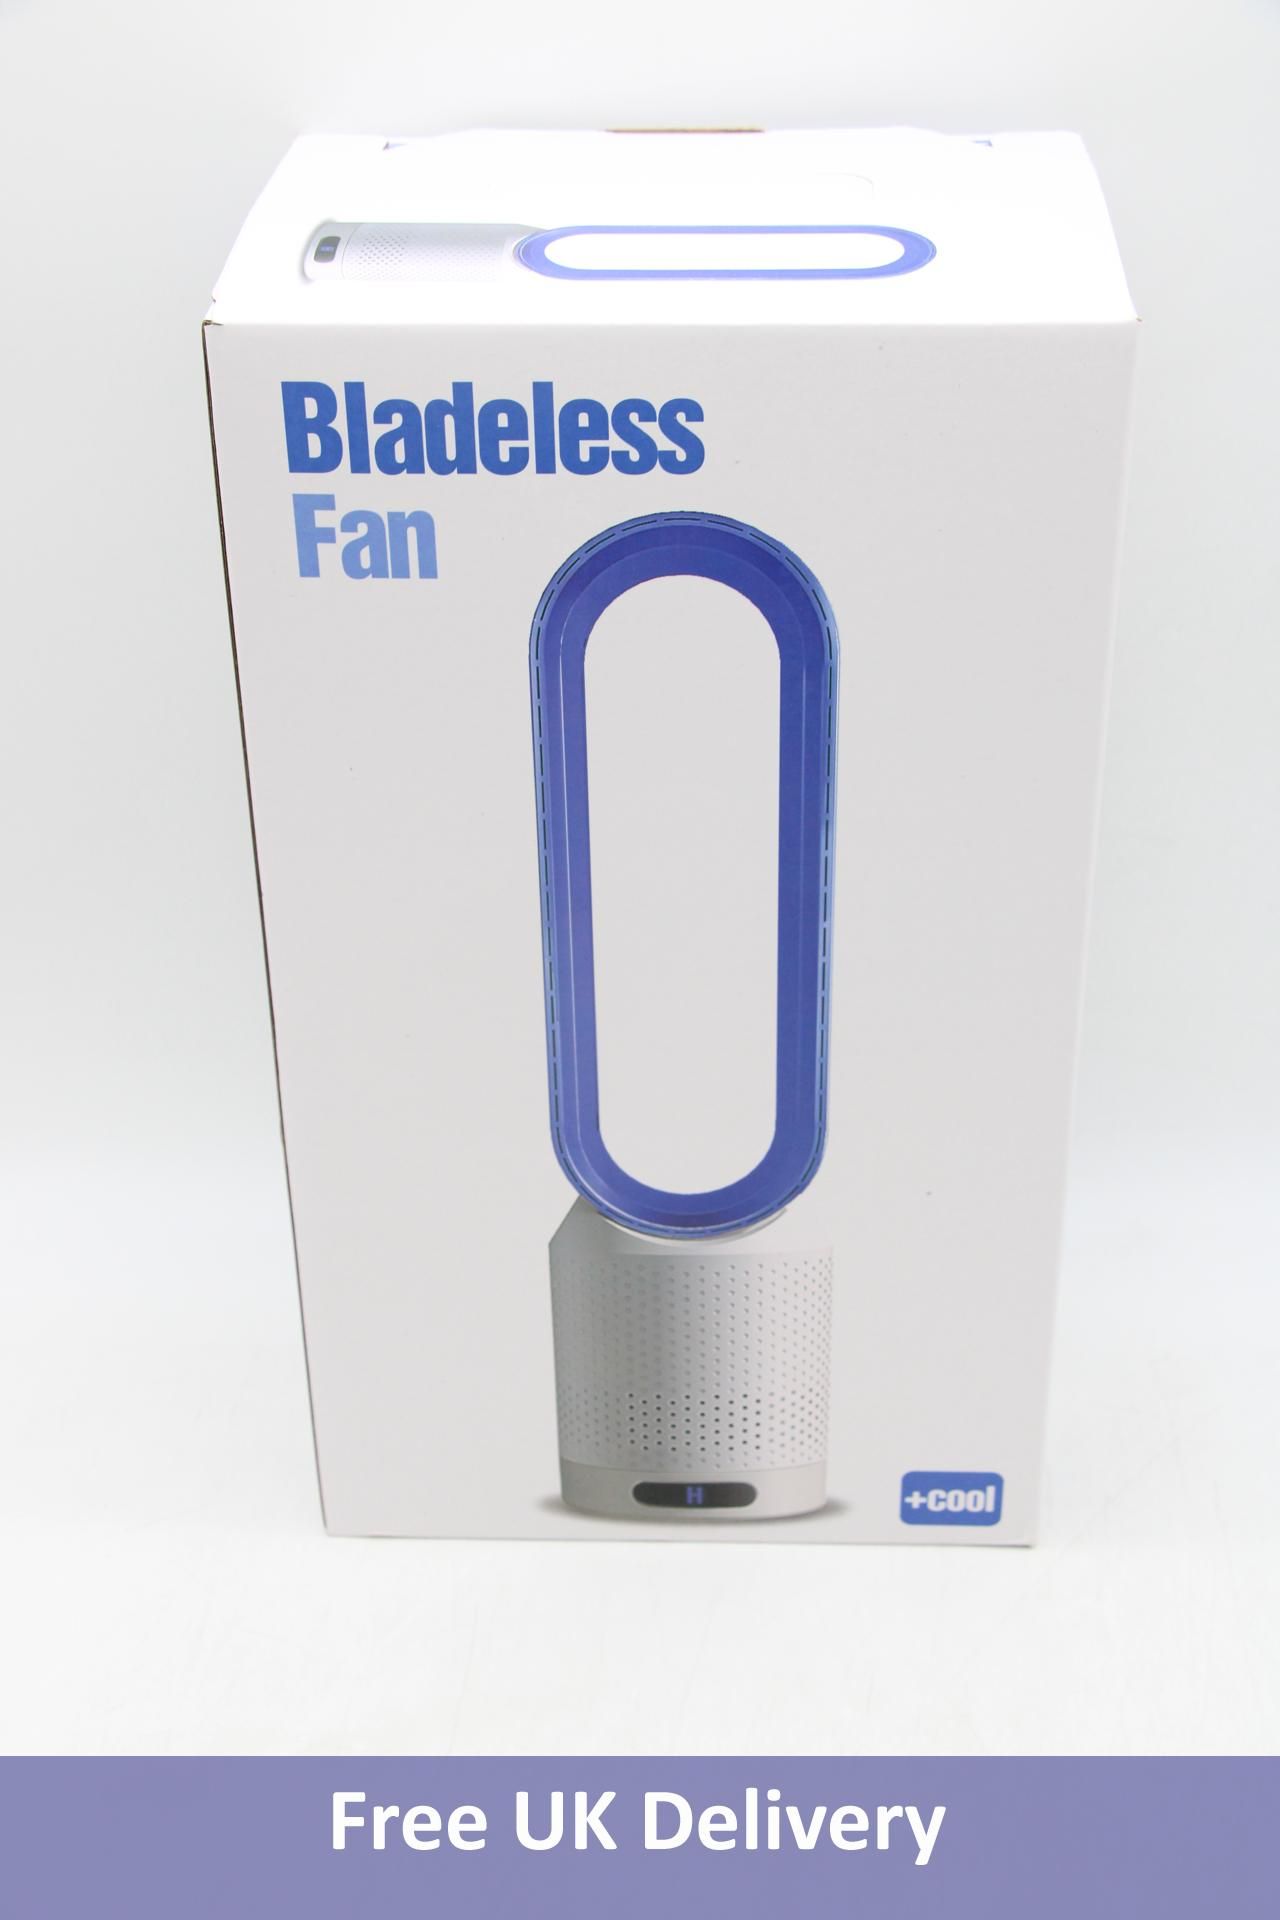 Three Cool Bladeless Fans, White - Image 2 of 3